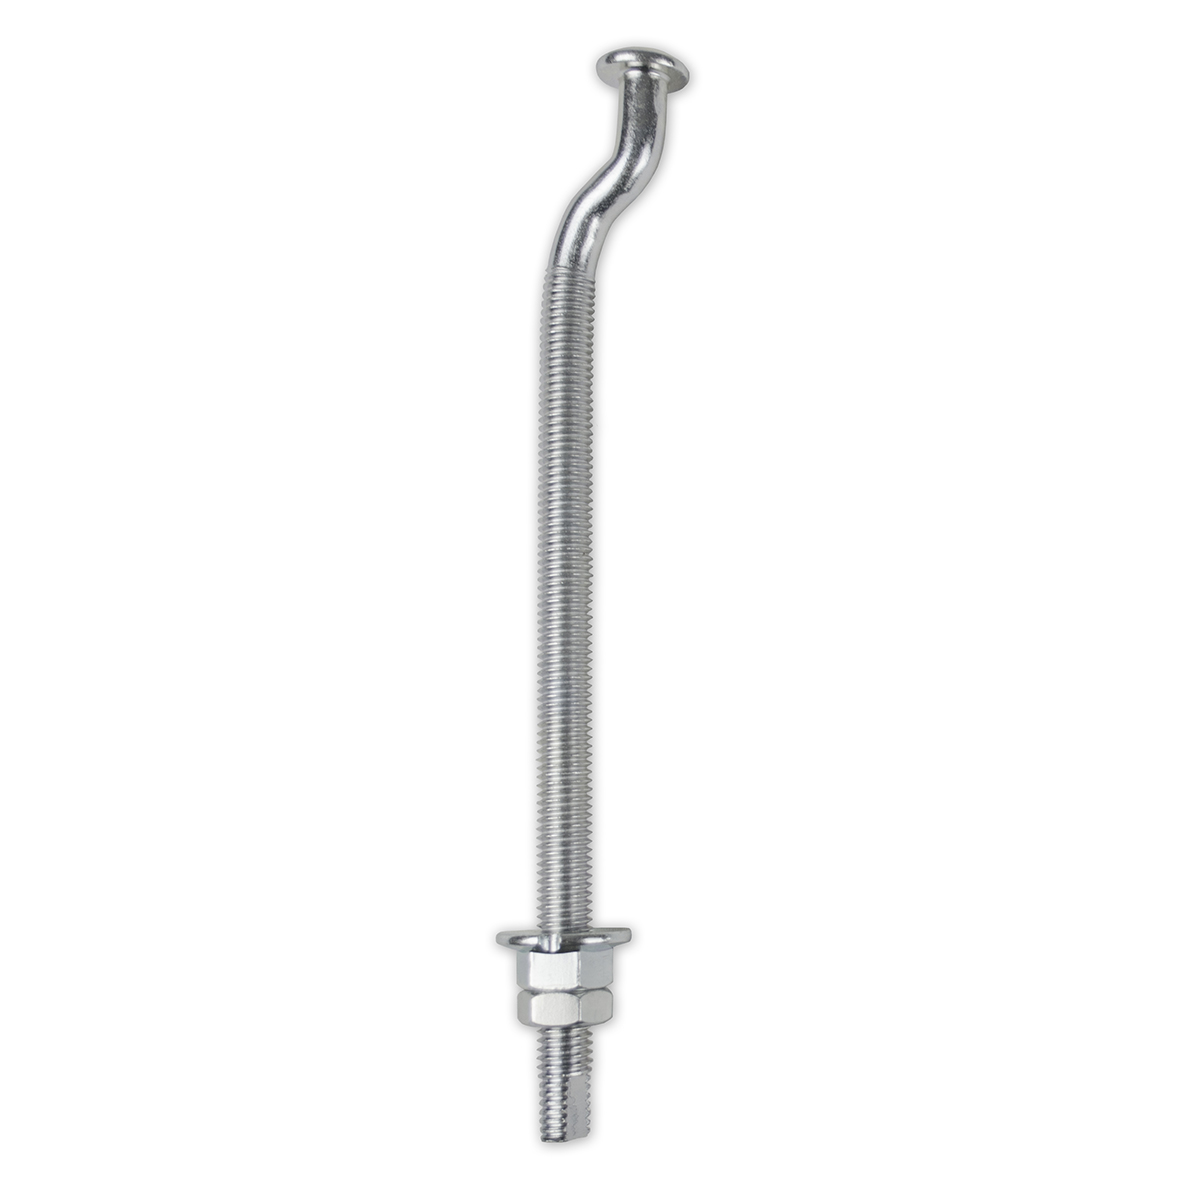 Cannonball Pendant Bolt  - 9-1/2-in